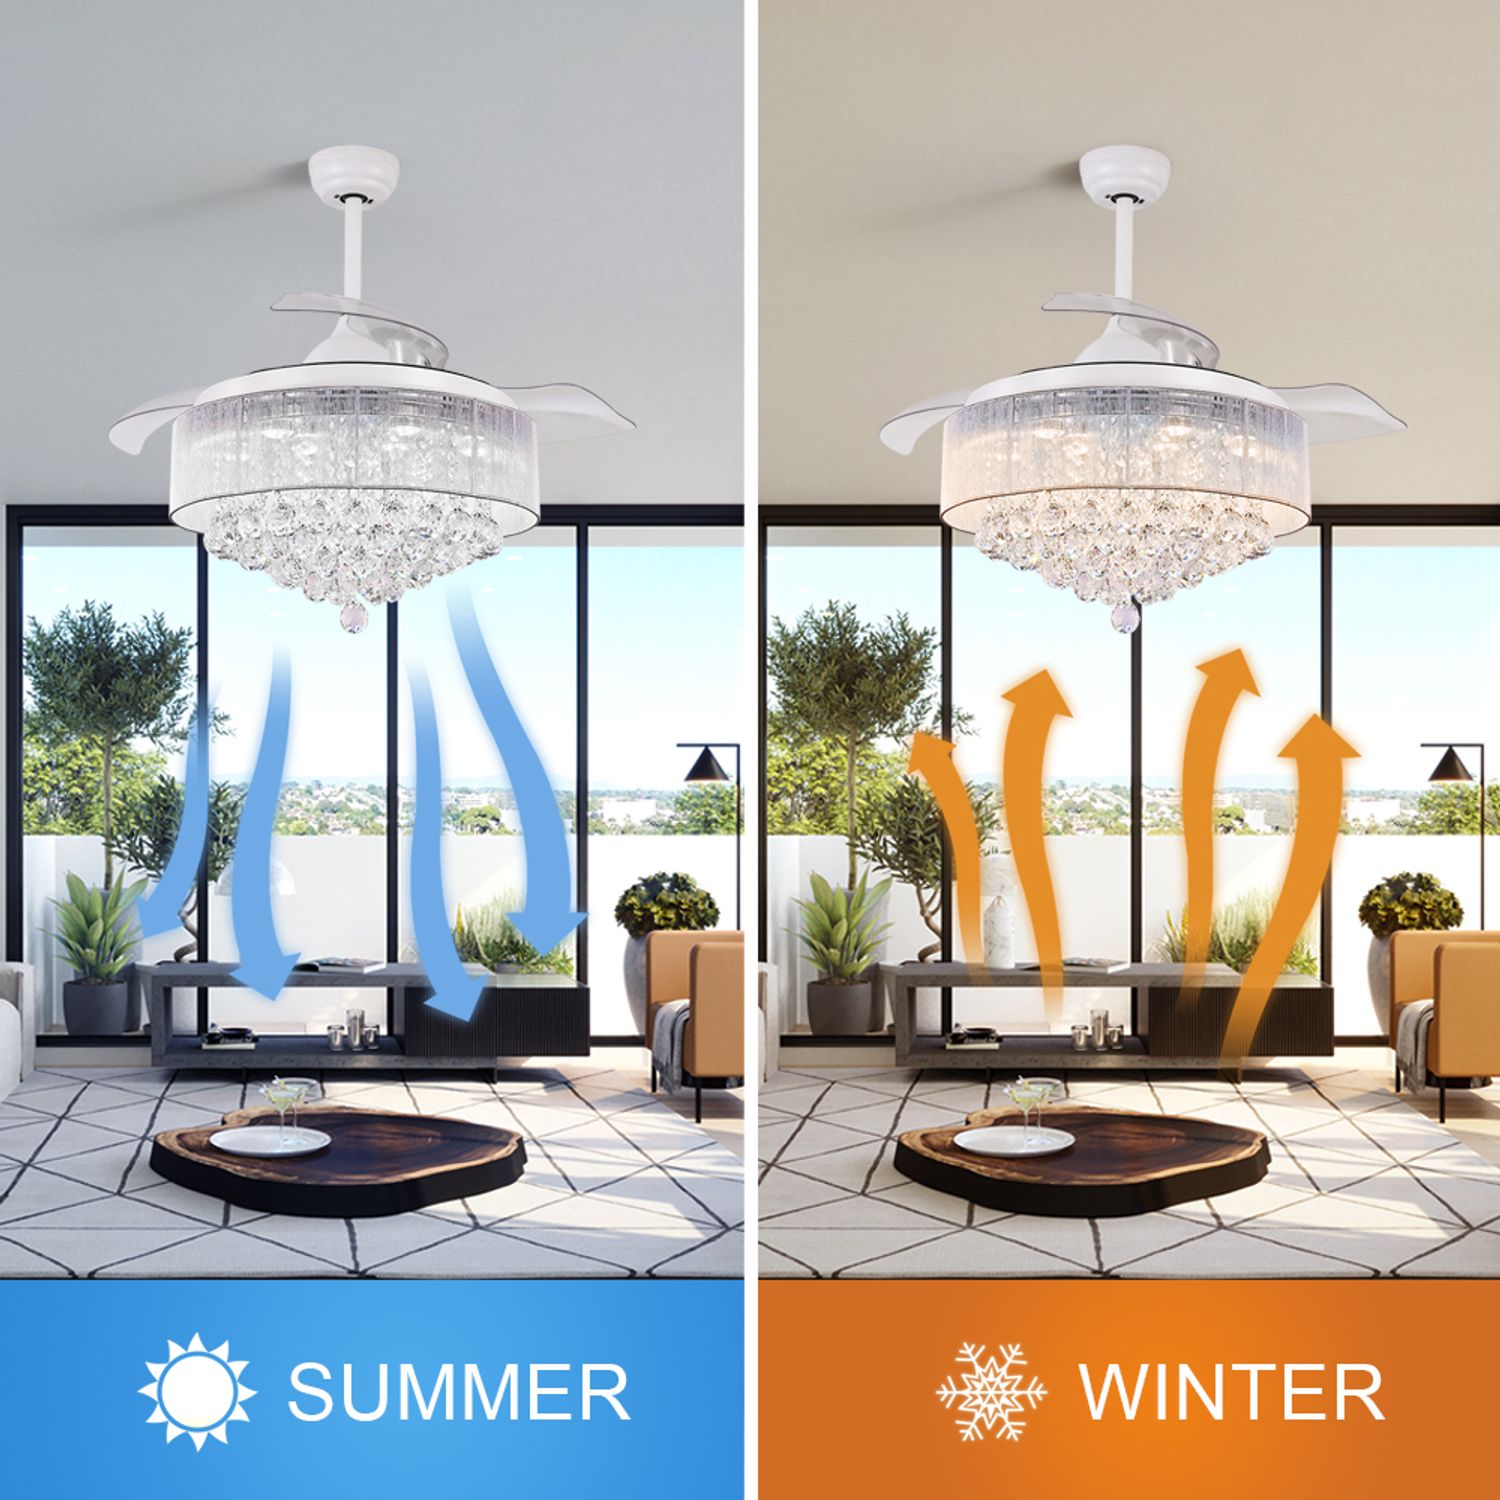 Stylish Decorative Crystal Chandelier Ceiling Fan with Retractable Blades 